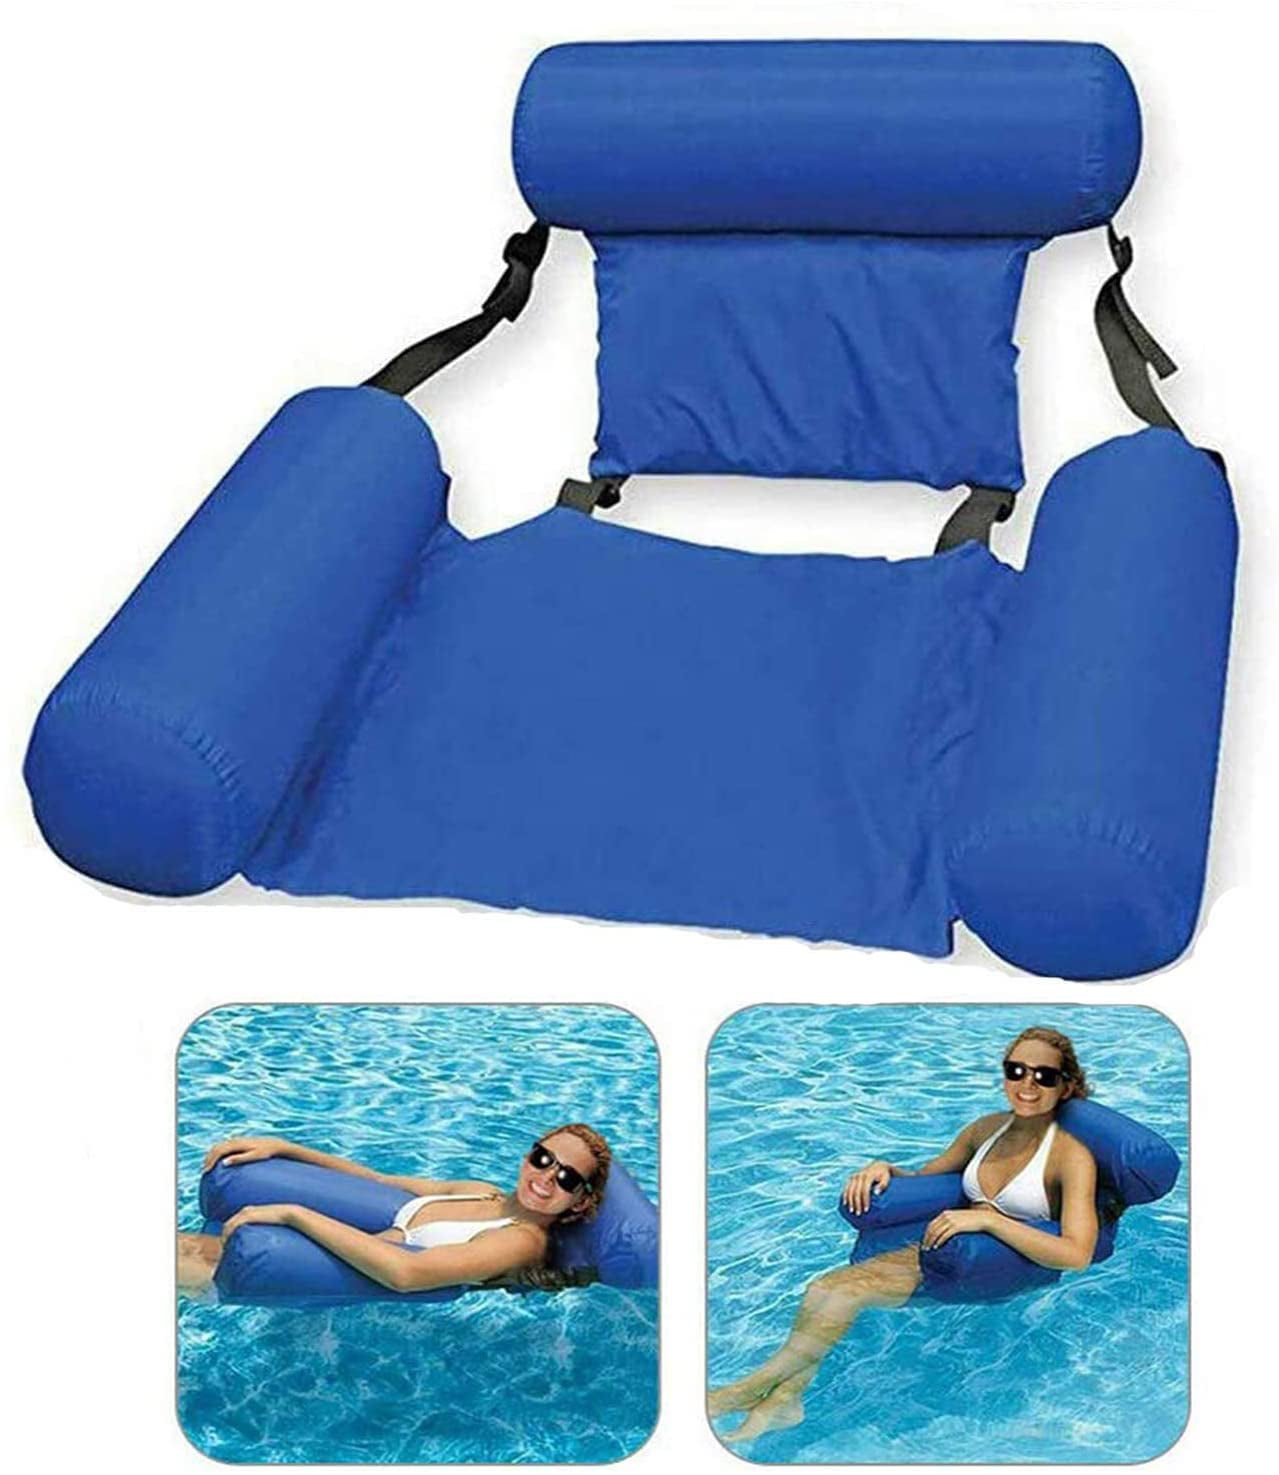 Details about   Portable Floating Inflatable Water Bed Foldable Hammock For Swimming Pool 